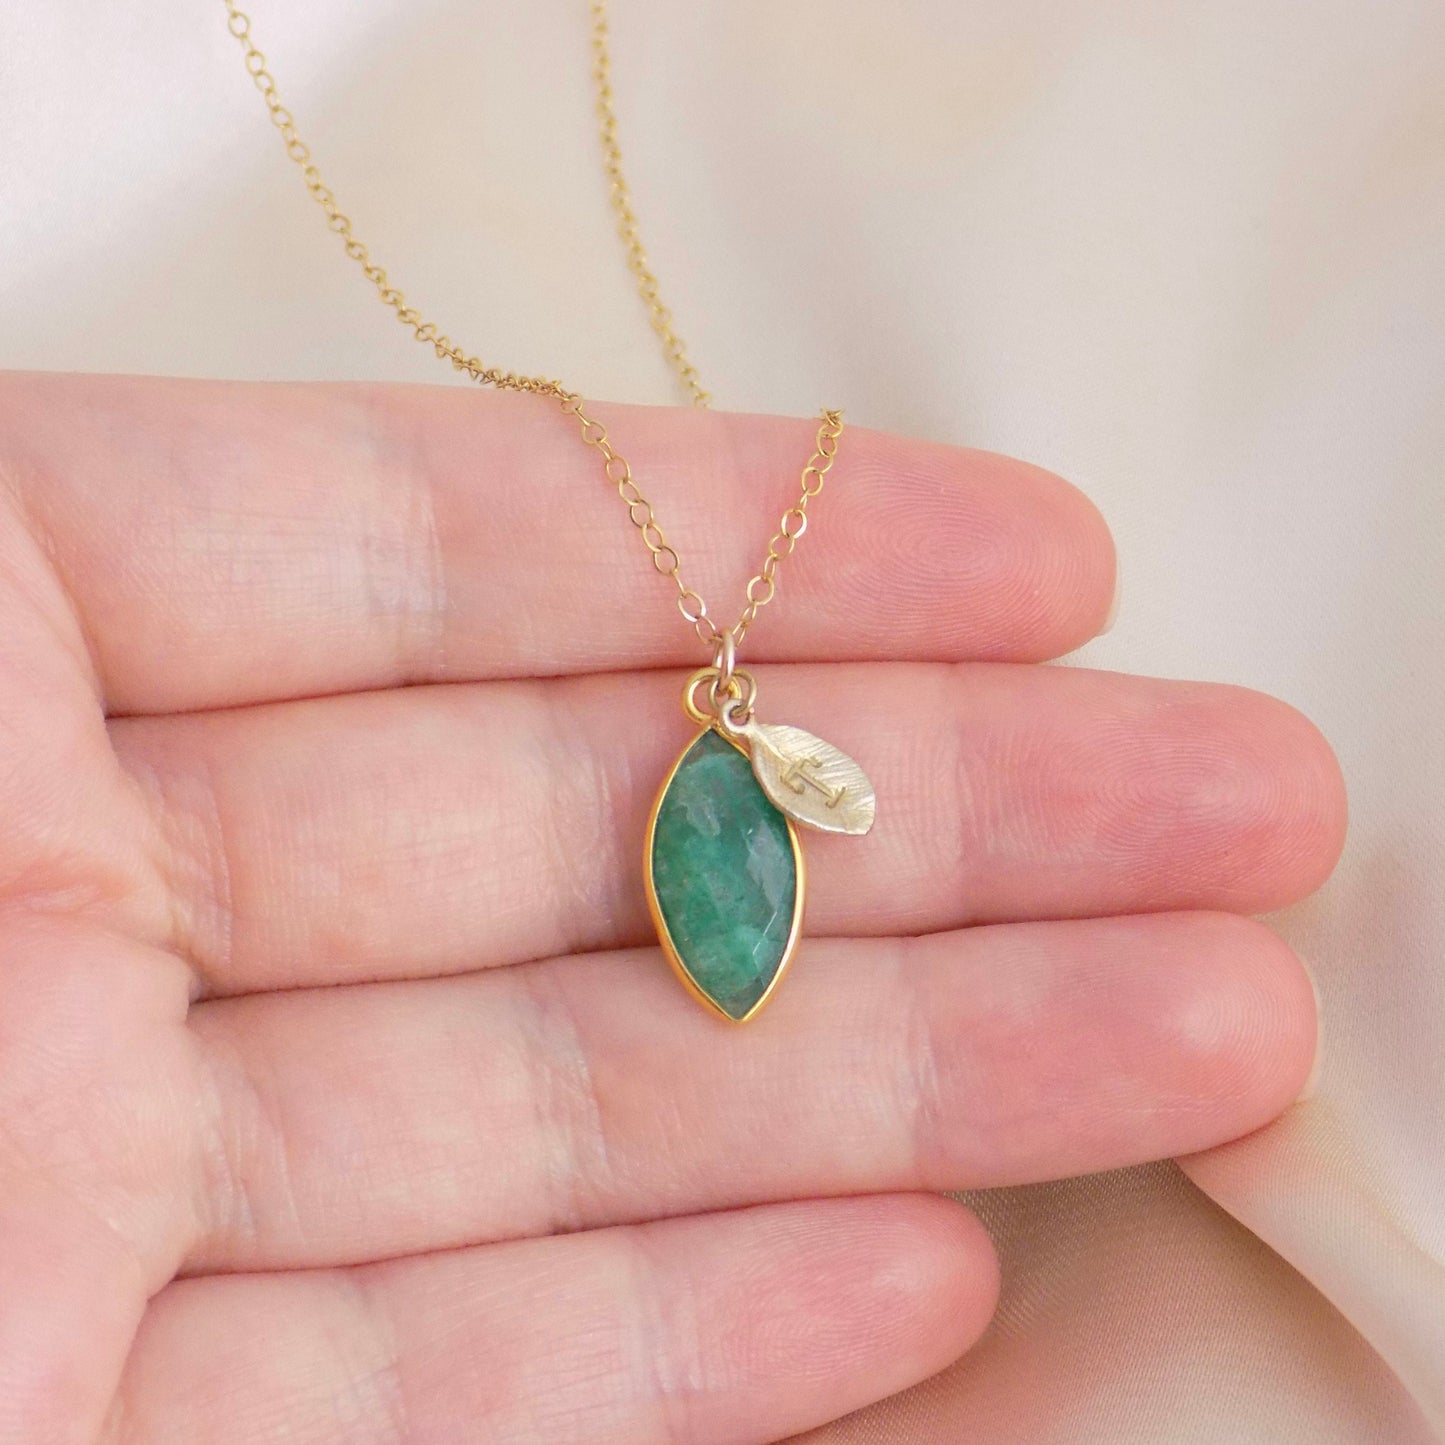 Personalized Gifts For Mom - Emerald Necklace